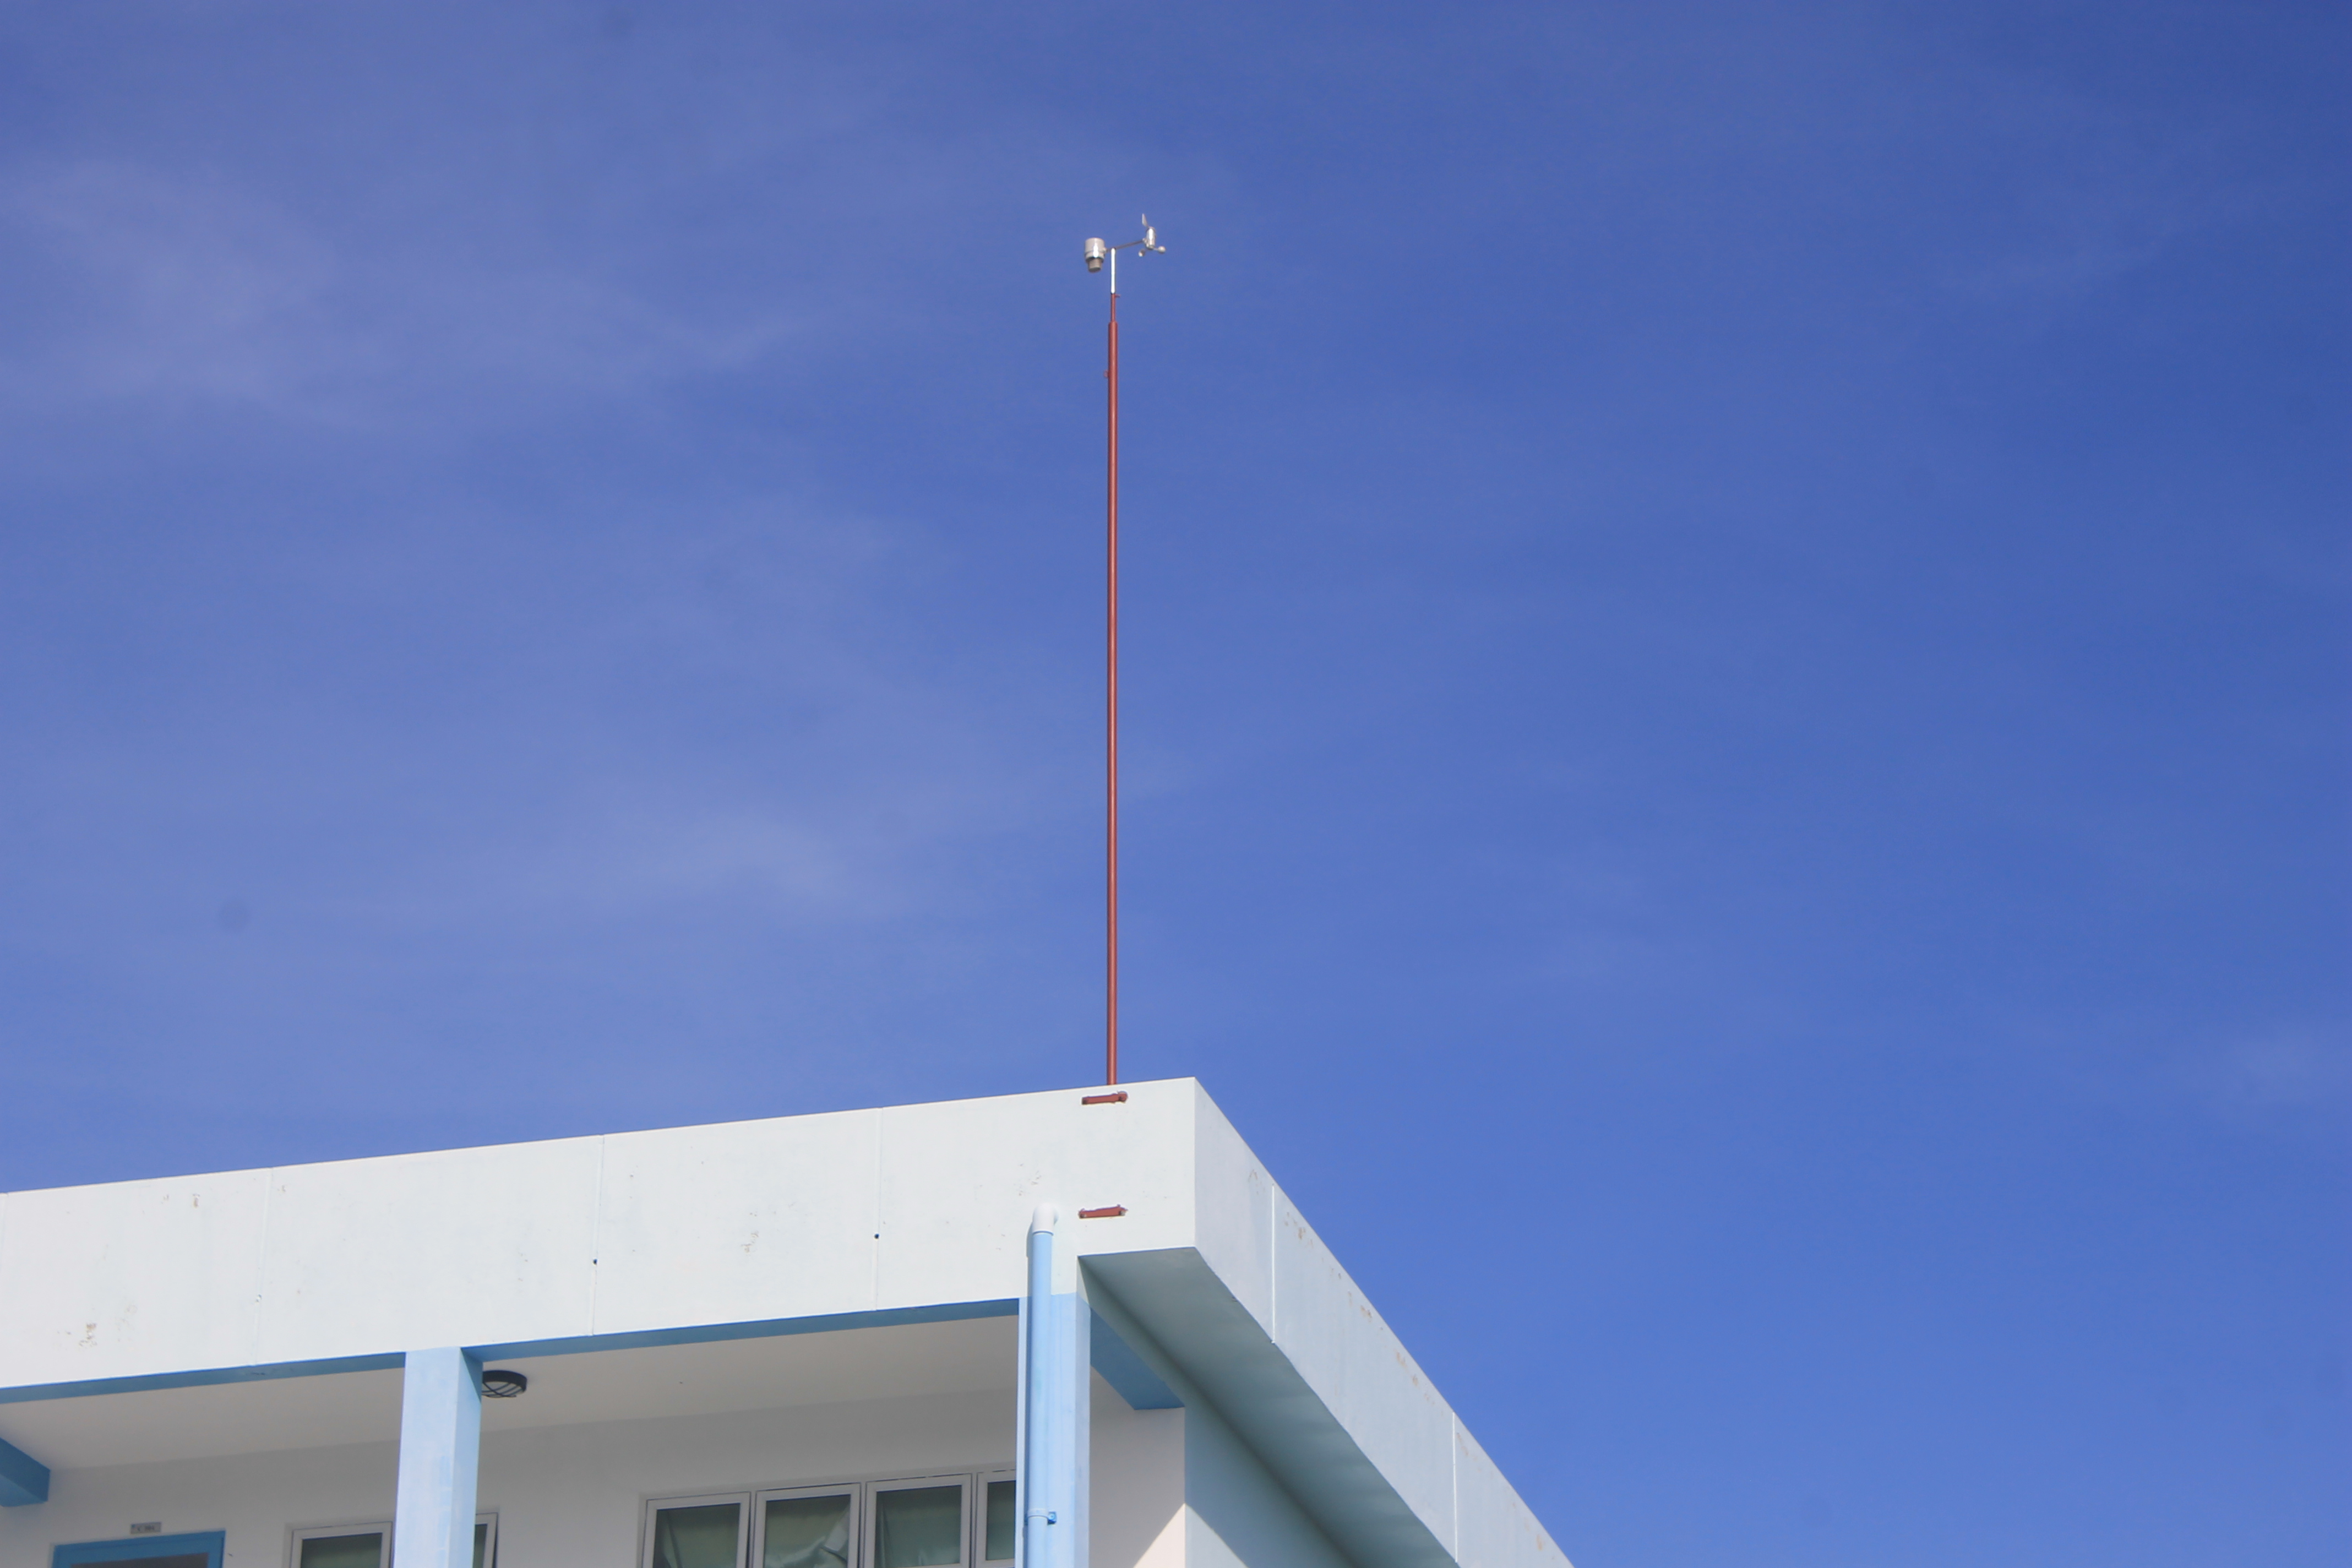 The Ambient Weather Station mounted on top of the Thinadhoo School building